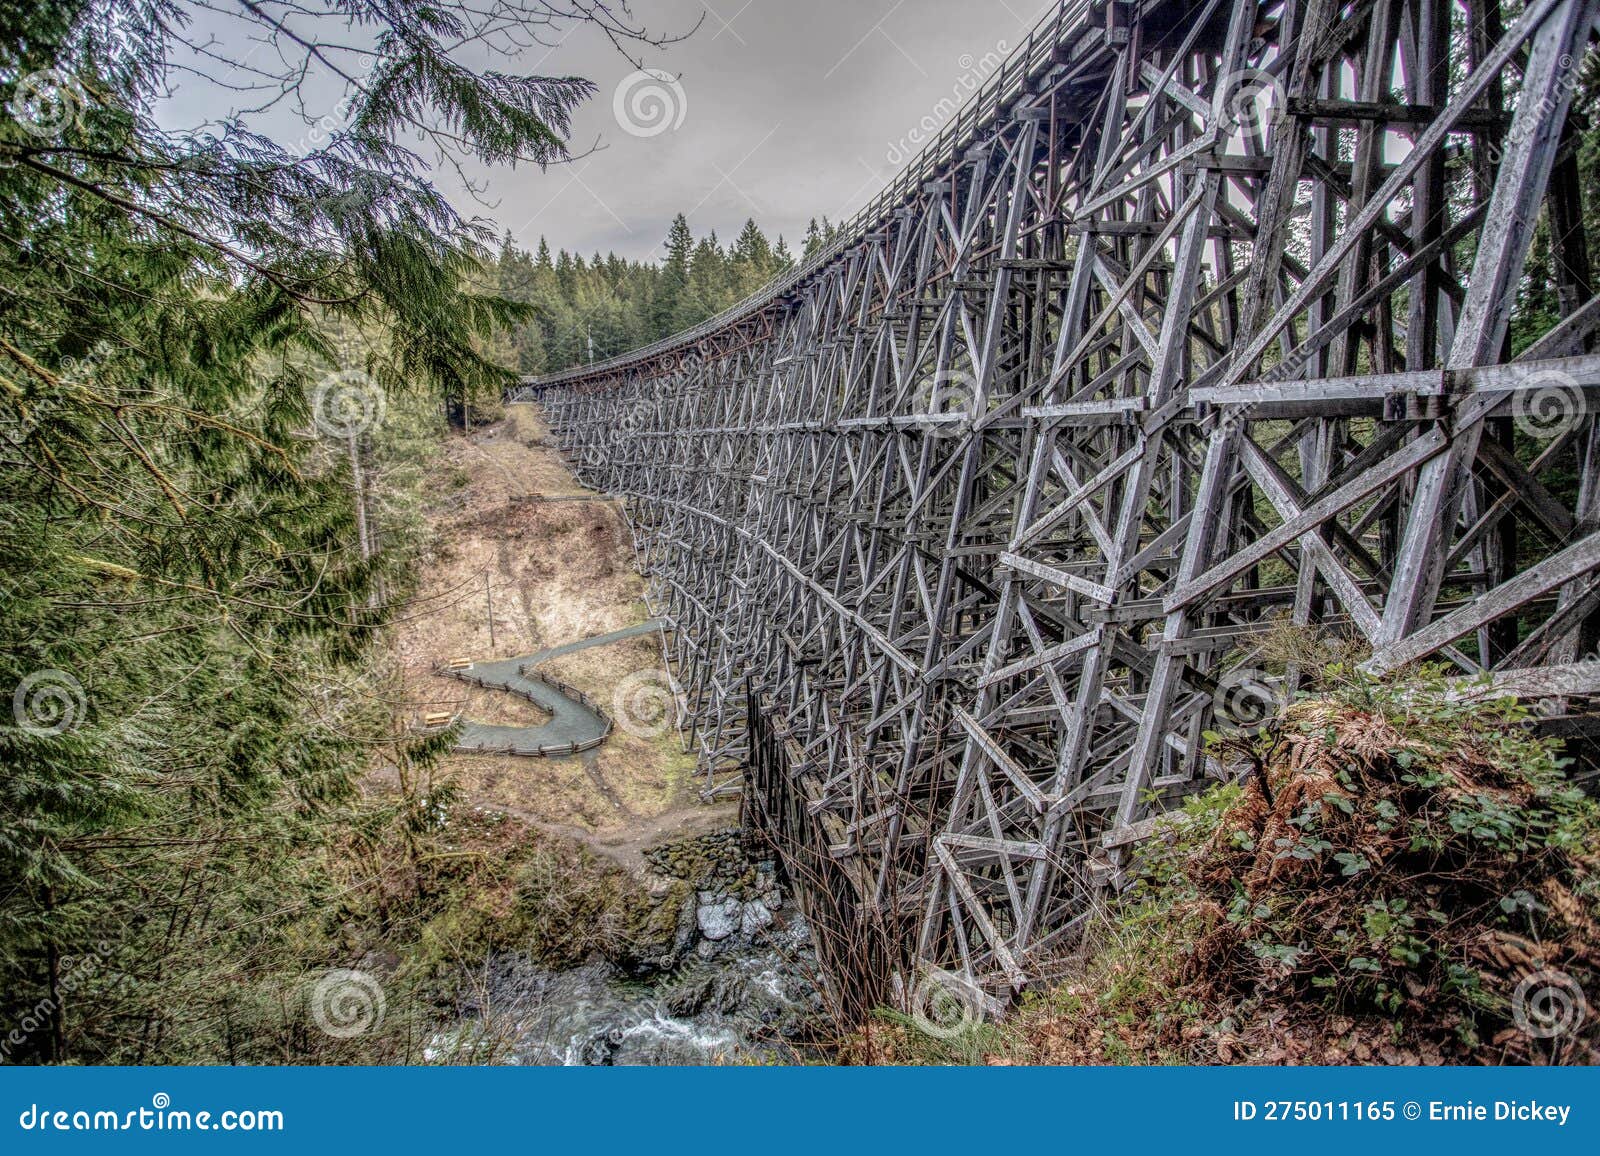 the massive wooden kinsol trestle of shawnigan lake vancouver island